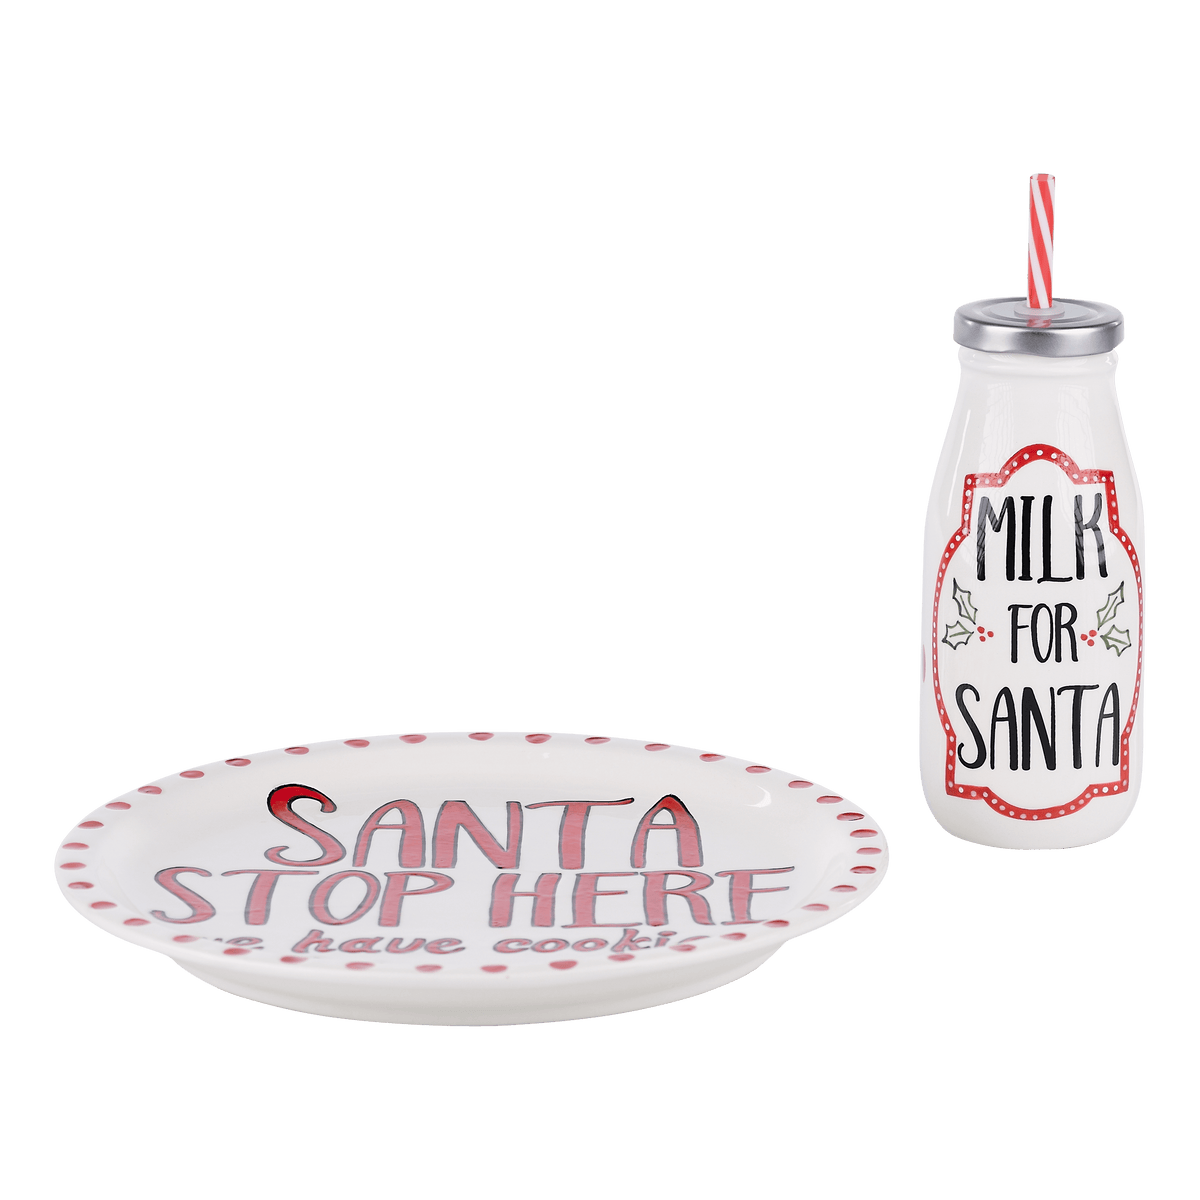 Santa Stop Here Plate and Milk Bottle - GLORY HAUS 